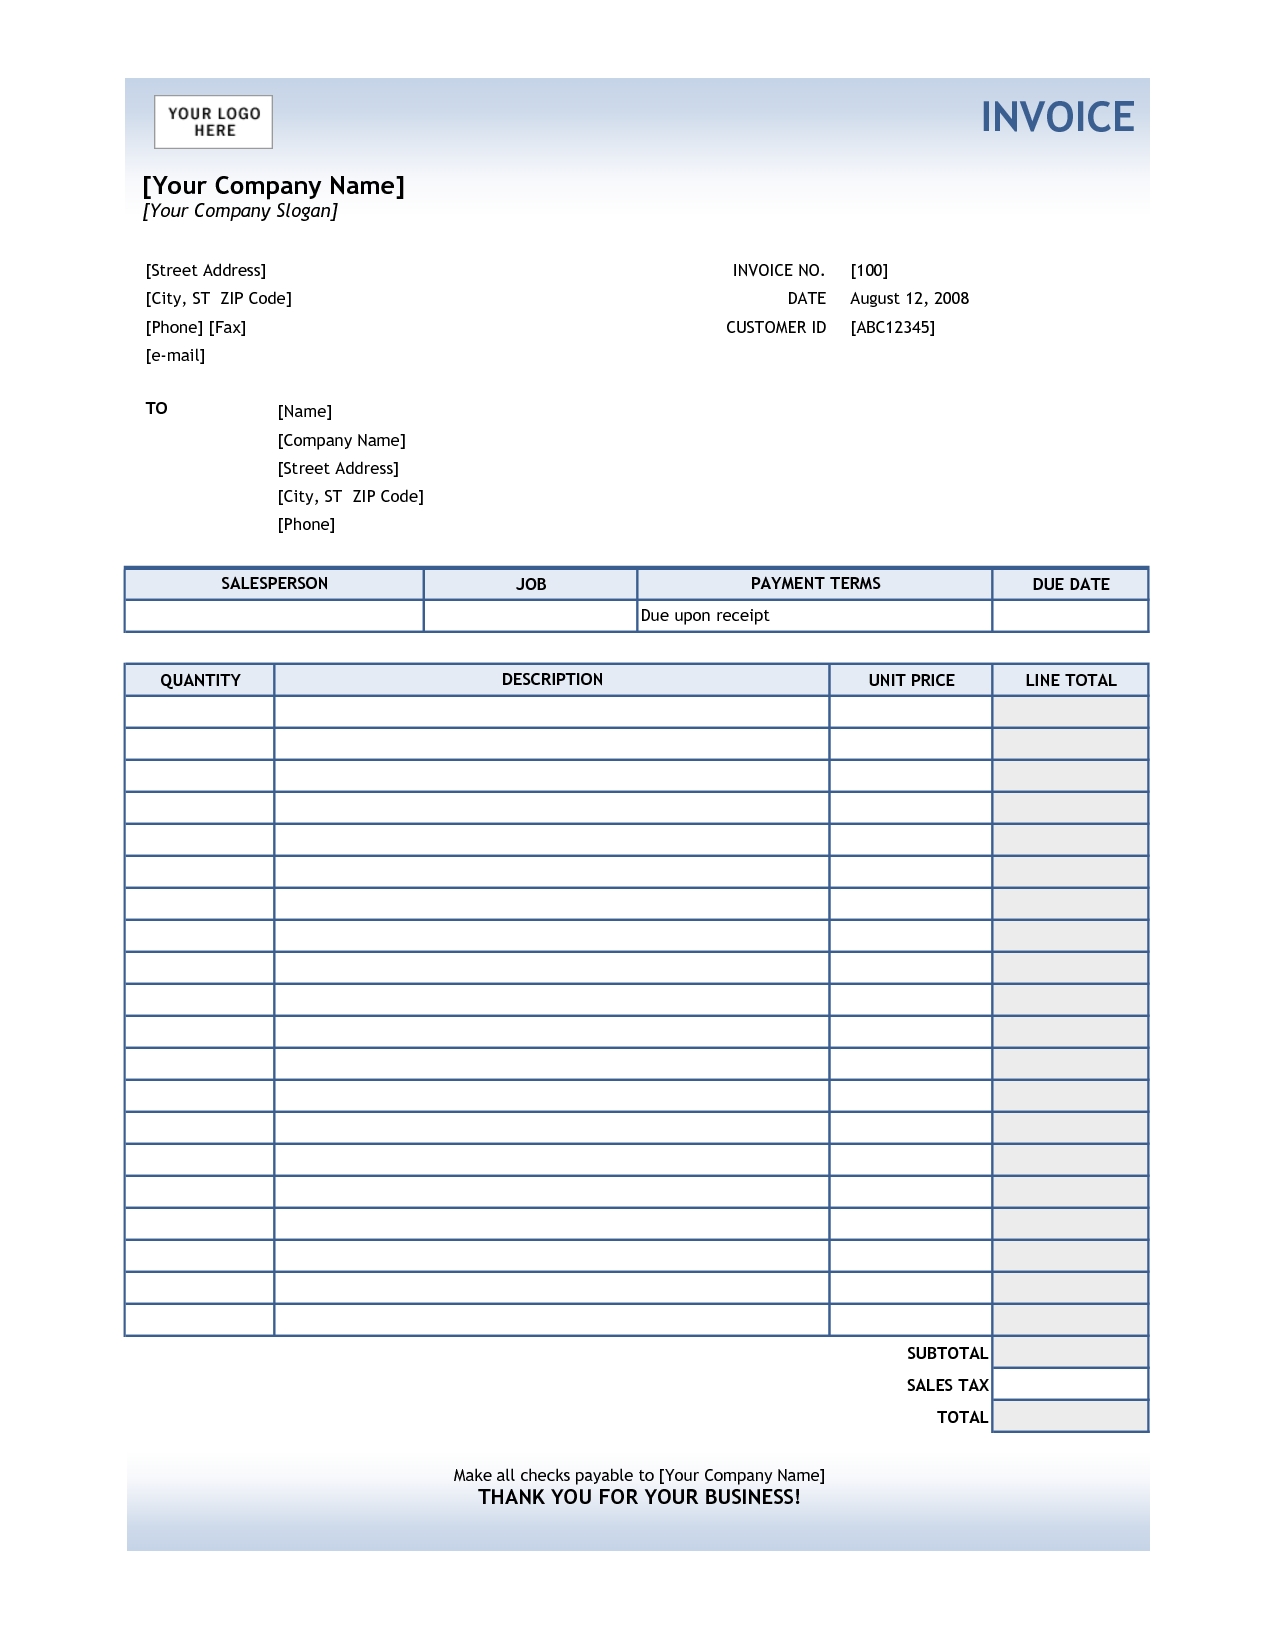 16 best photos of invoice format in excel excel service invoice invoice format excel